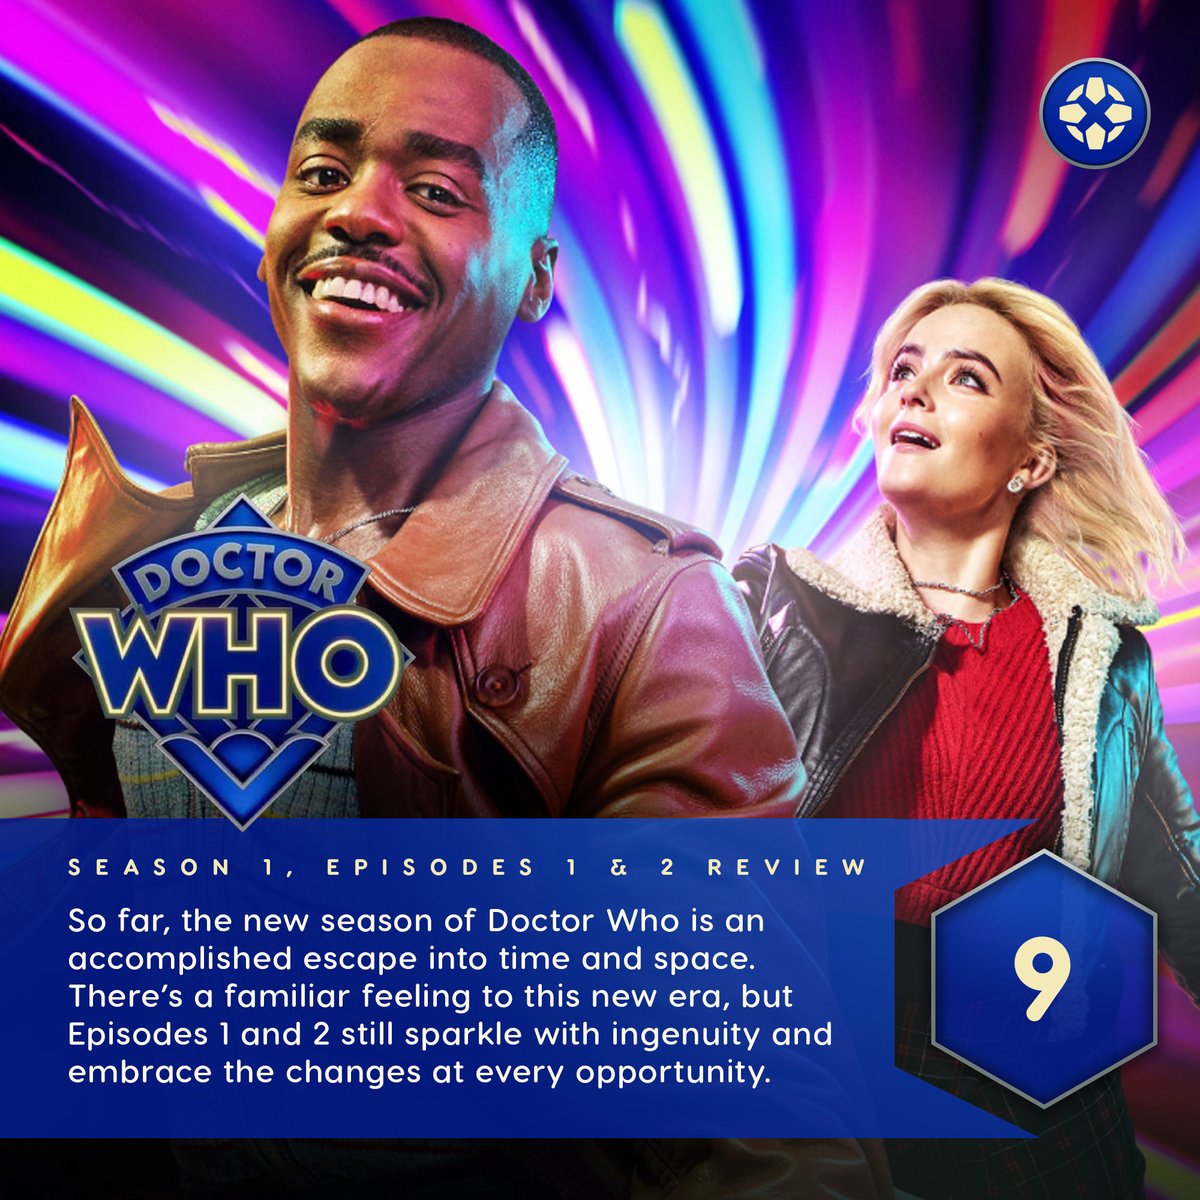 The beginning of Doctor Who’s latest “Season 1” is wonderfully welcoming to newcomers, but still gleefully leans into the ridiculous, as it chooses unapologetic fun at every opportunity. It’s a great start to the new era.

Our Episodes 1 & 2 review: bit.ly/4b7JRAQ